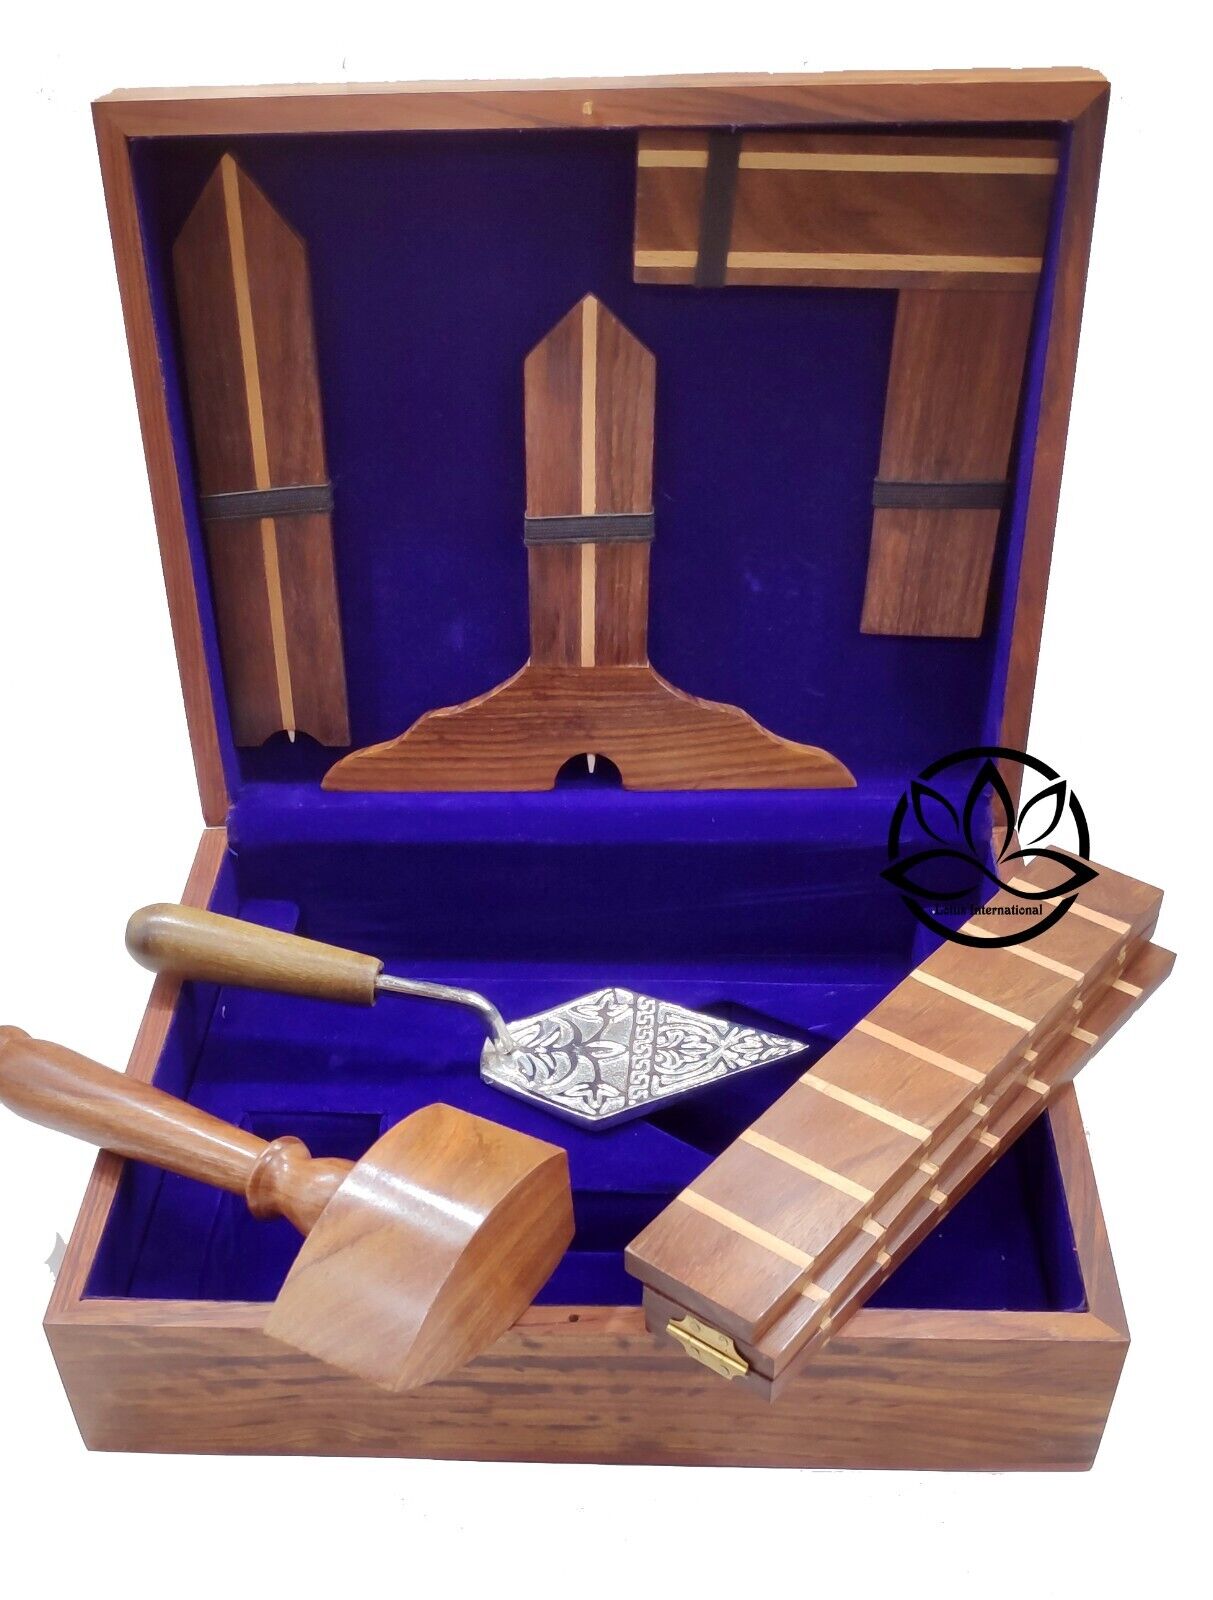 Wooden Plumb Square And Rule Handcrafted Wooden Masonic working Tools set